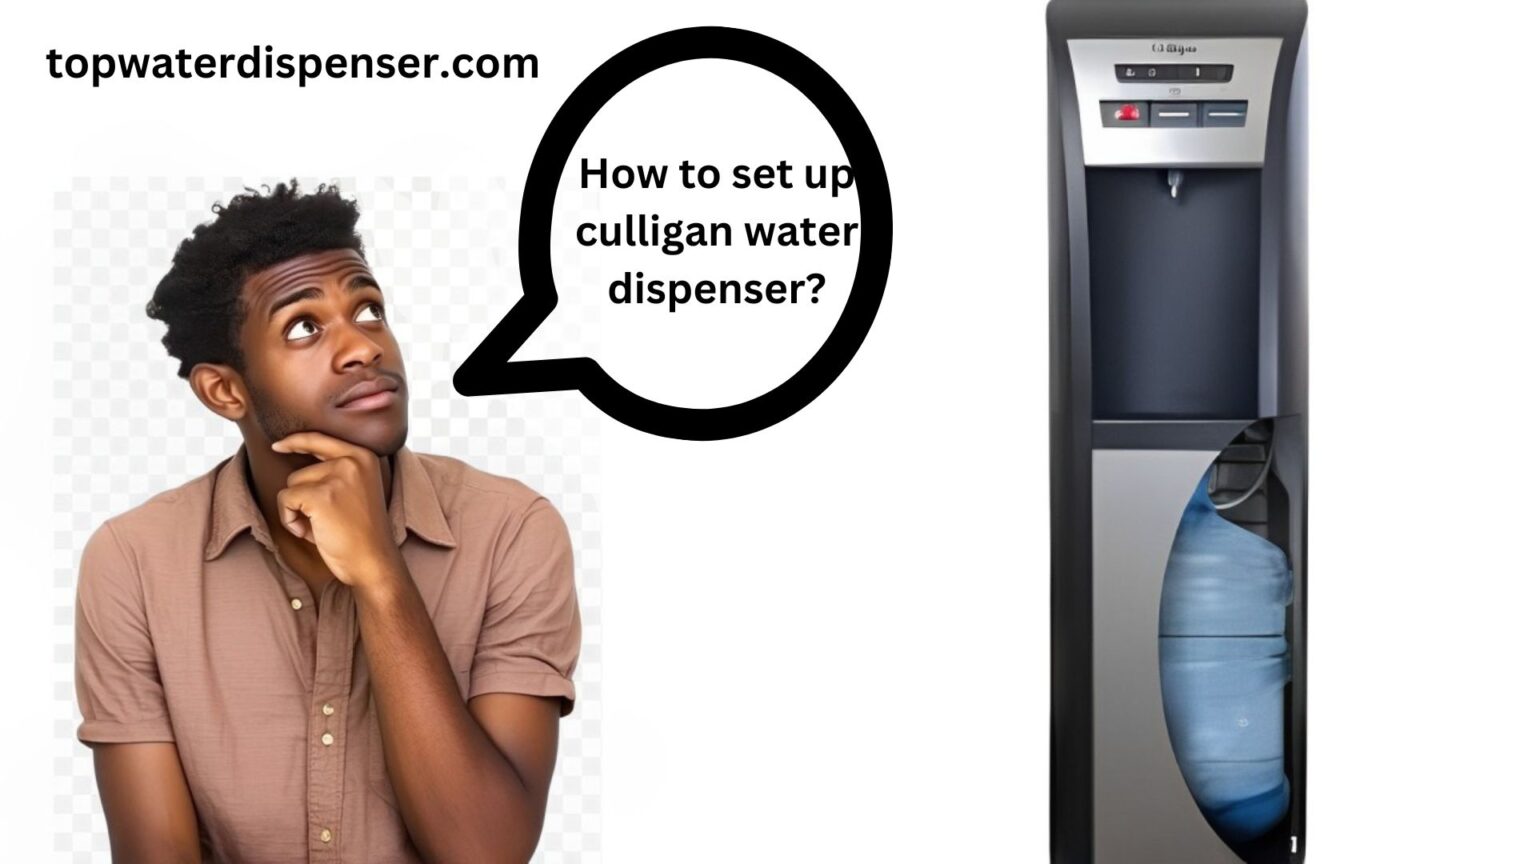 How to set up culligan water dispenser?